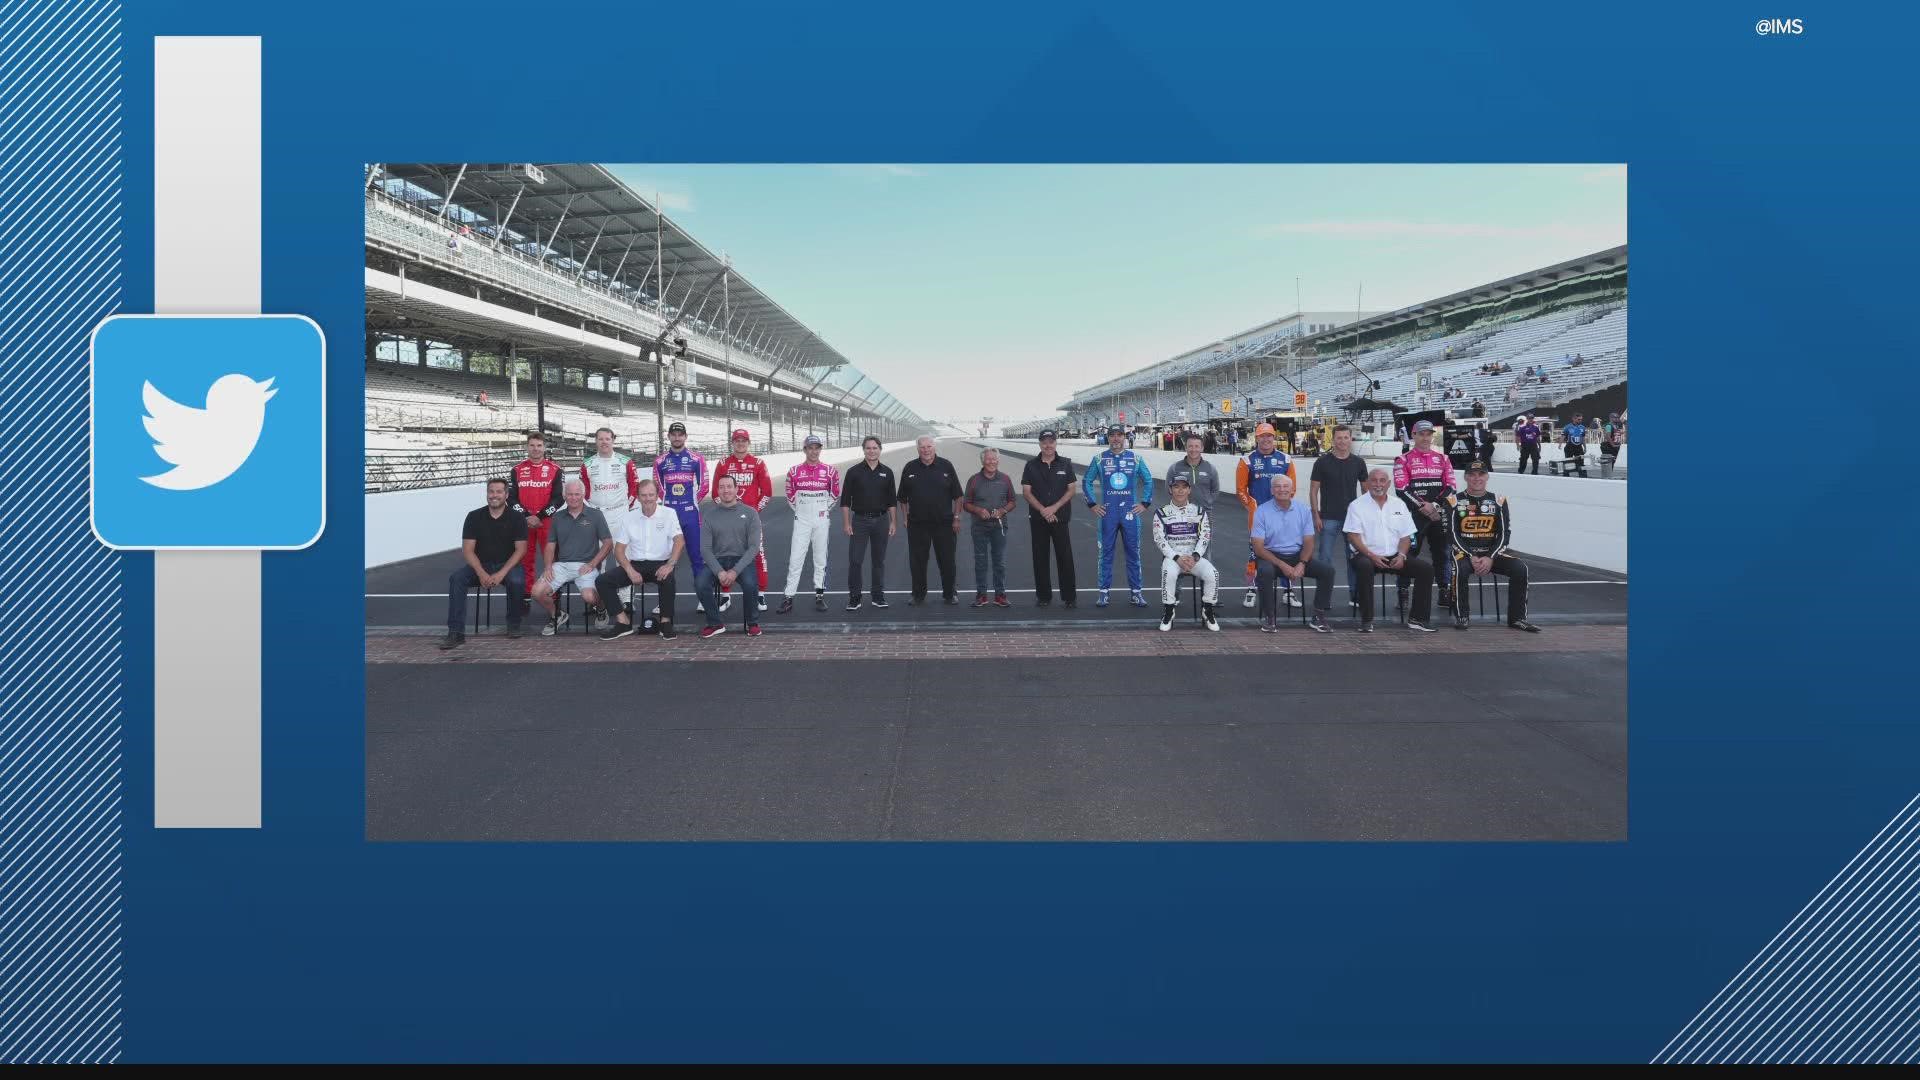 The Indianapolis Motor Speedway tweeted a photo of nearly two dozen racing legends on the Yard of Bricks saying, "This is Indy."